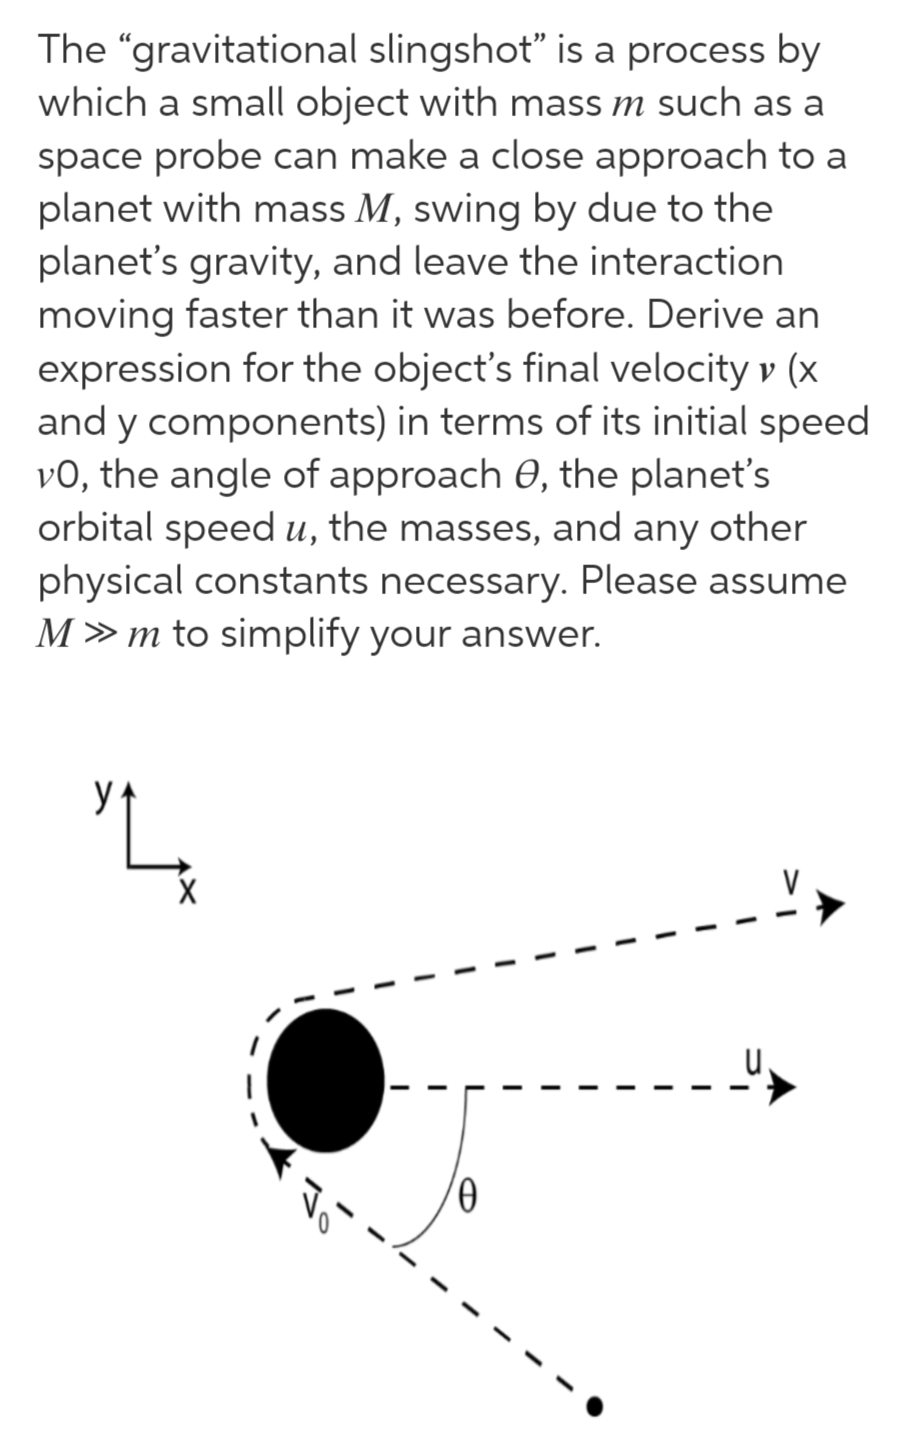 The "gravitational slingshot" is a process by
which a small object with mass m such as a
space probe can make a close approach to a
planet with mass M, swing by due to the
planet's gravity, and leave the interaction
moving faster than it was before. Derive an
expression for the object's final velocity v (x
and y components) in terms of its initial speed
vO, the angle of approach 0, the planet's
orbital speed u, the masses, and any
physical constants necessary. Please assume
Mm to simplify your answer.
other
У
ө
